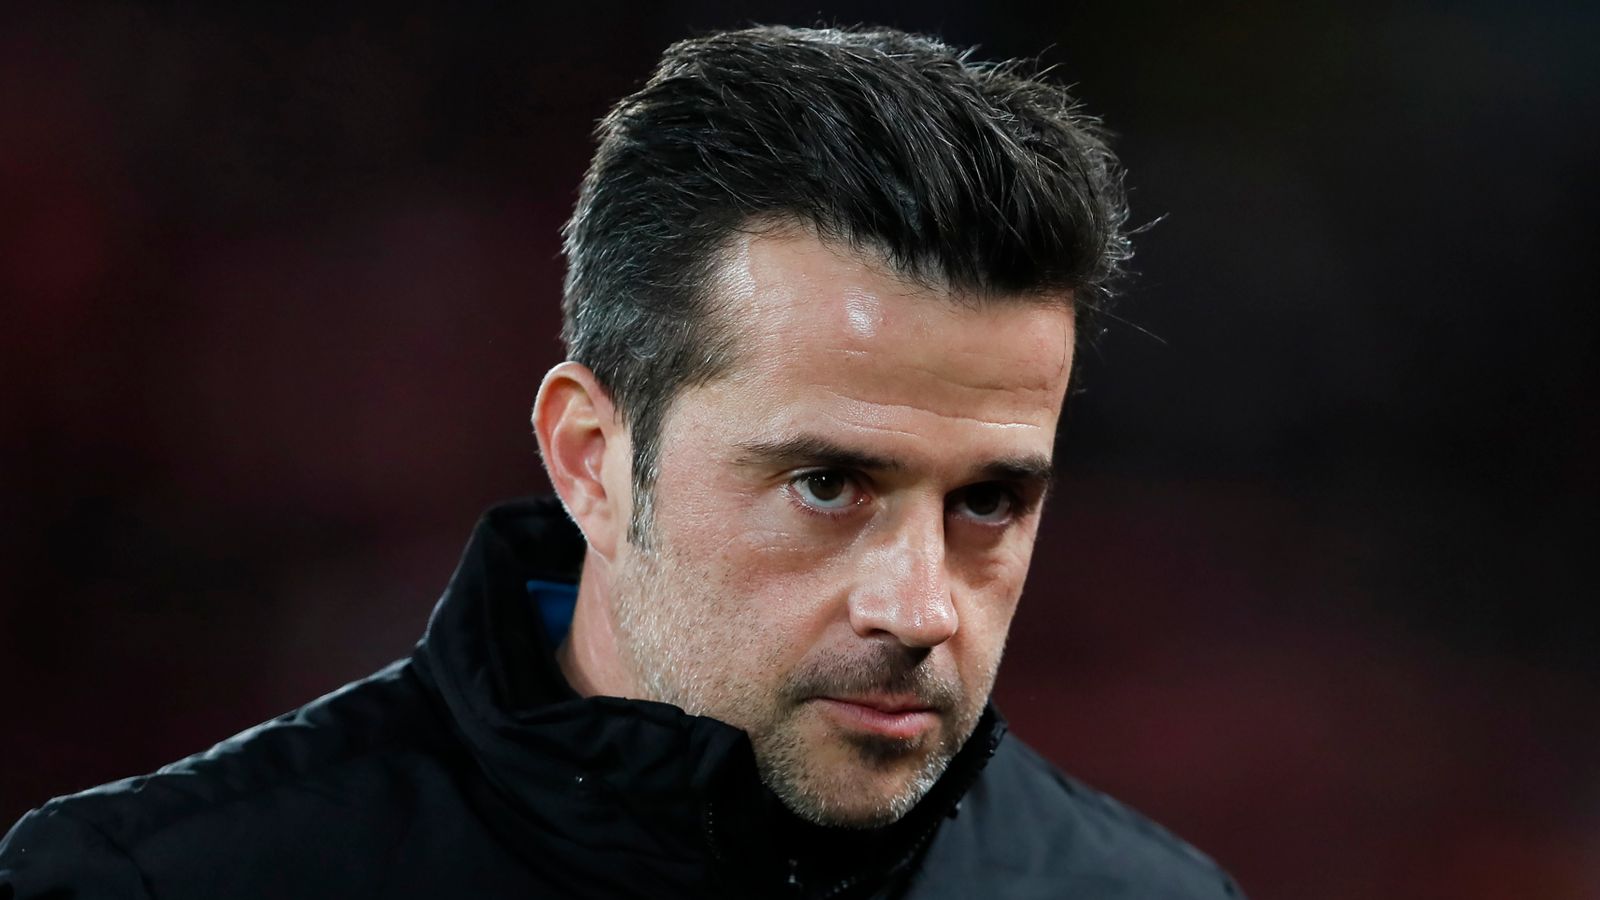 Marco Silva: Fulham in advanced talks to appoint former Everton and Watford boss as new head coach